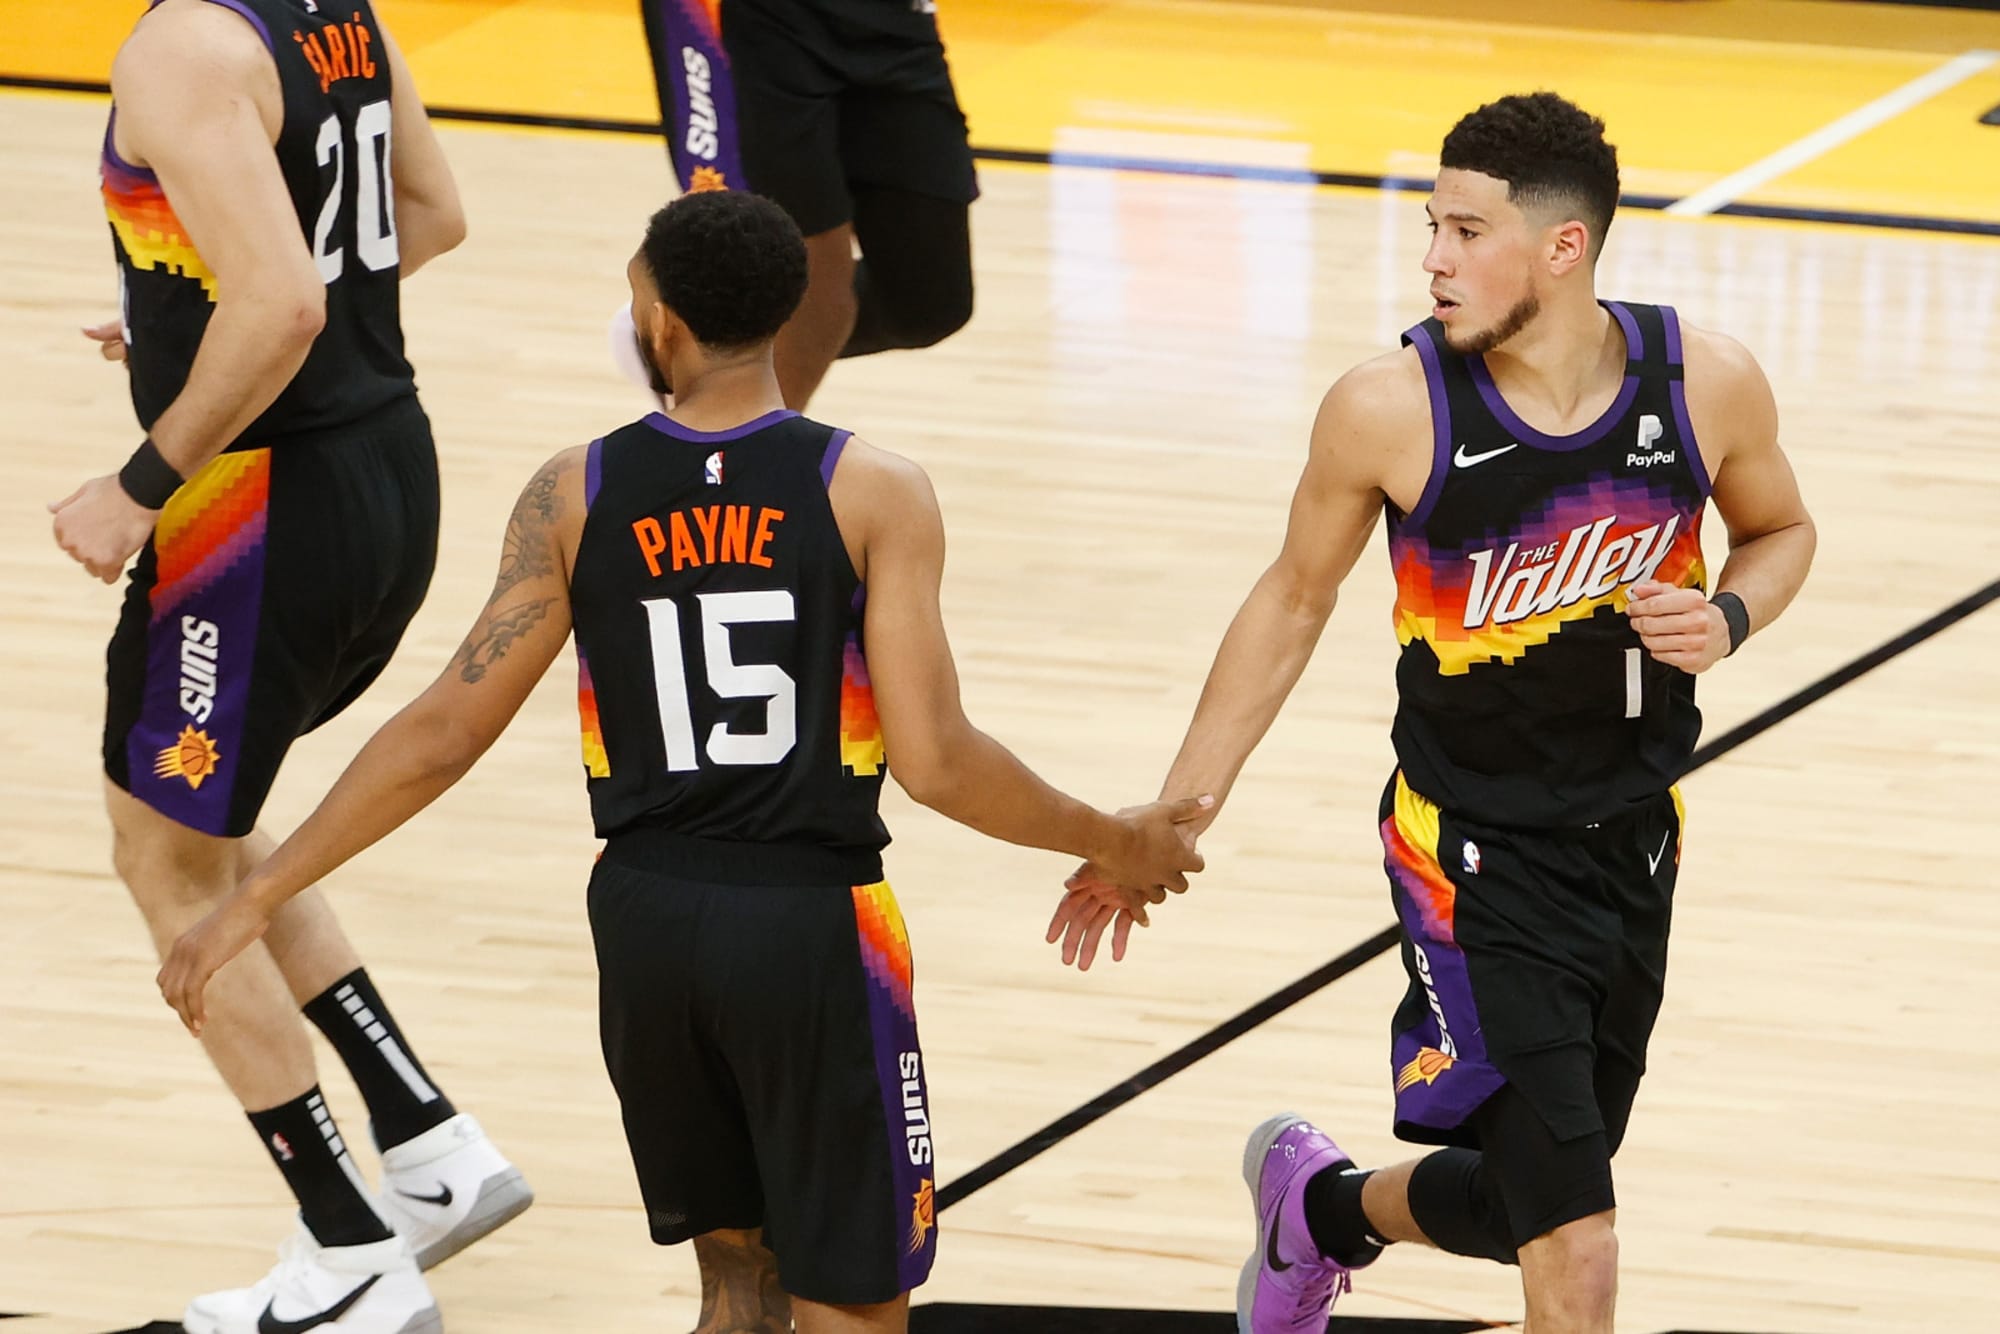 NBA Playoffs 2021: Devin Booker was thinking of Kobe Bryant after